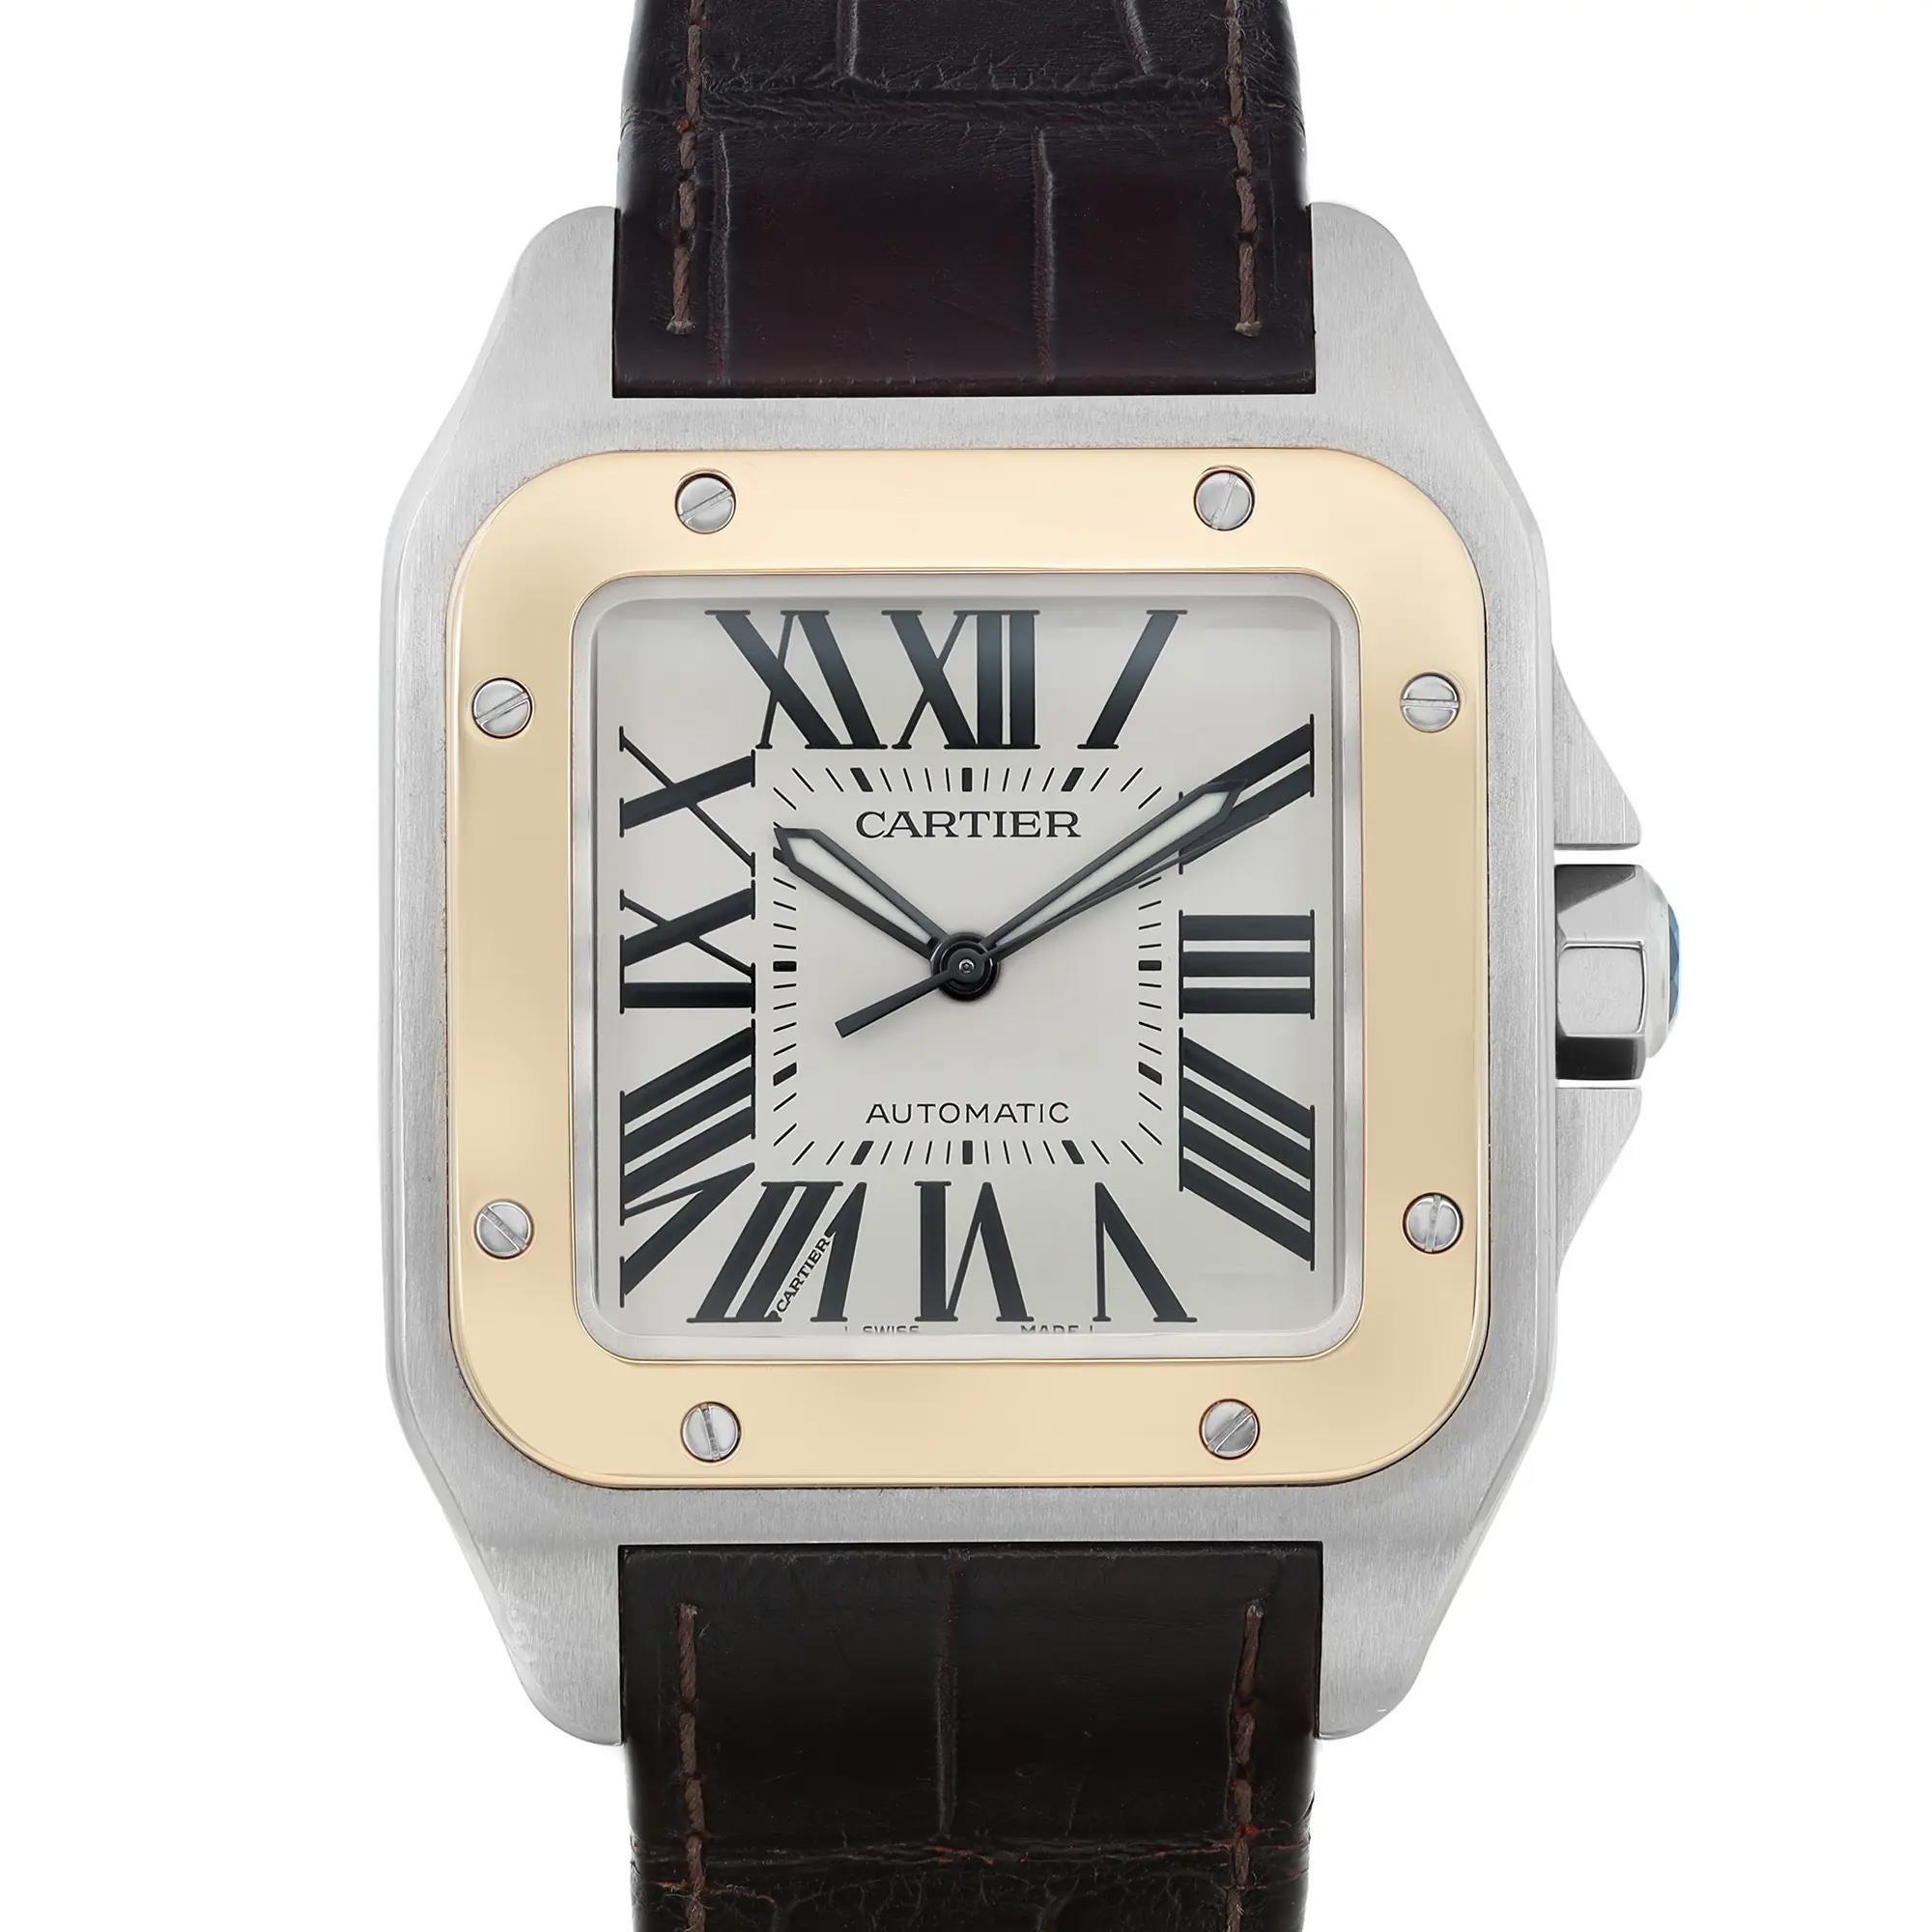 Pre-owned. The band shows signs of wear and peeling on the inner part which is shown in the pictures. Some signs of scratches on the case.

Brand and Model Information:
Brand: Cartier
Model: Cartier Santos 100
Model Number: 3774

Type and